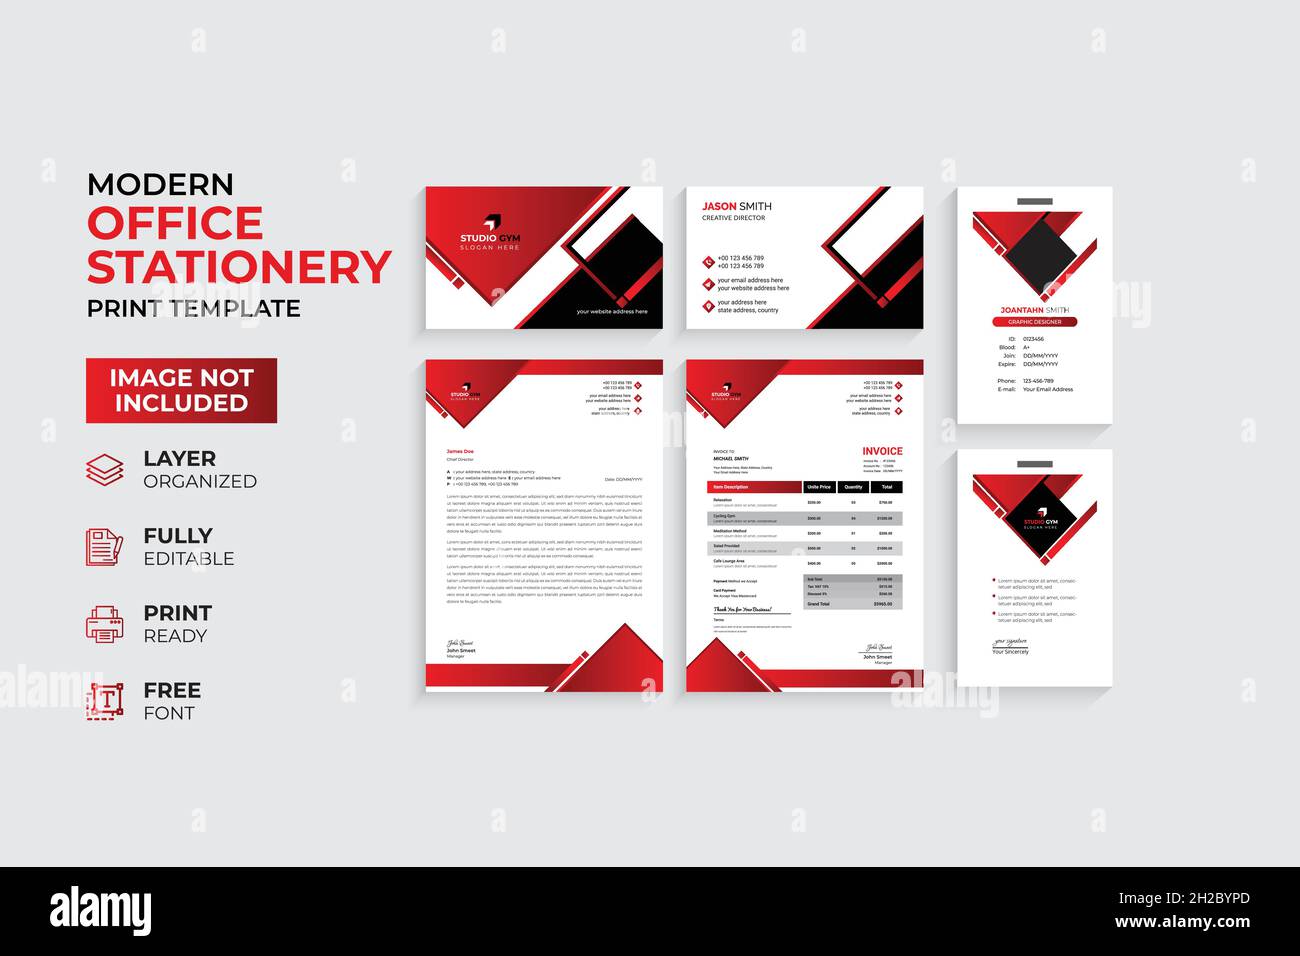 Stationery SOP Template